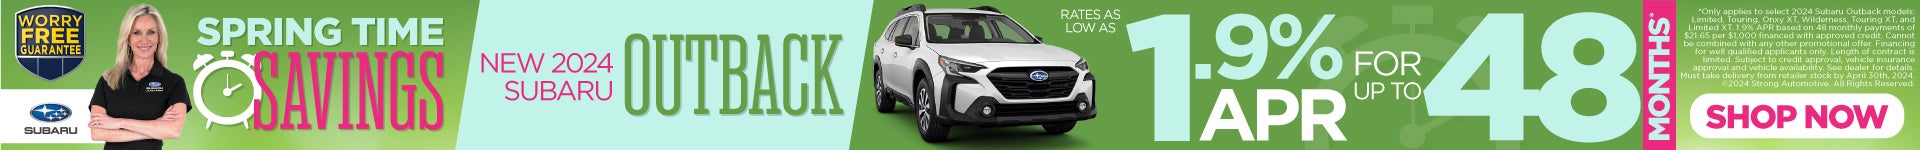 New 2024 Subaru Outback - 1.9% APR for up to 48 months* - Shop Now